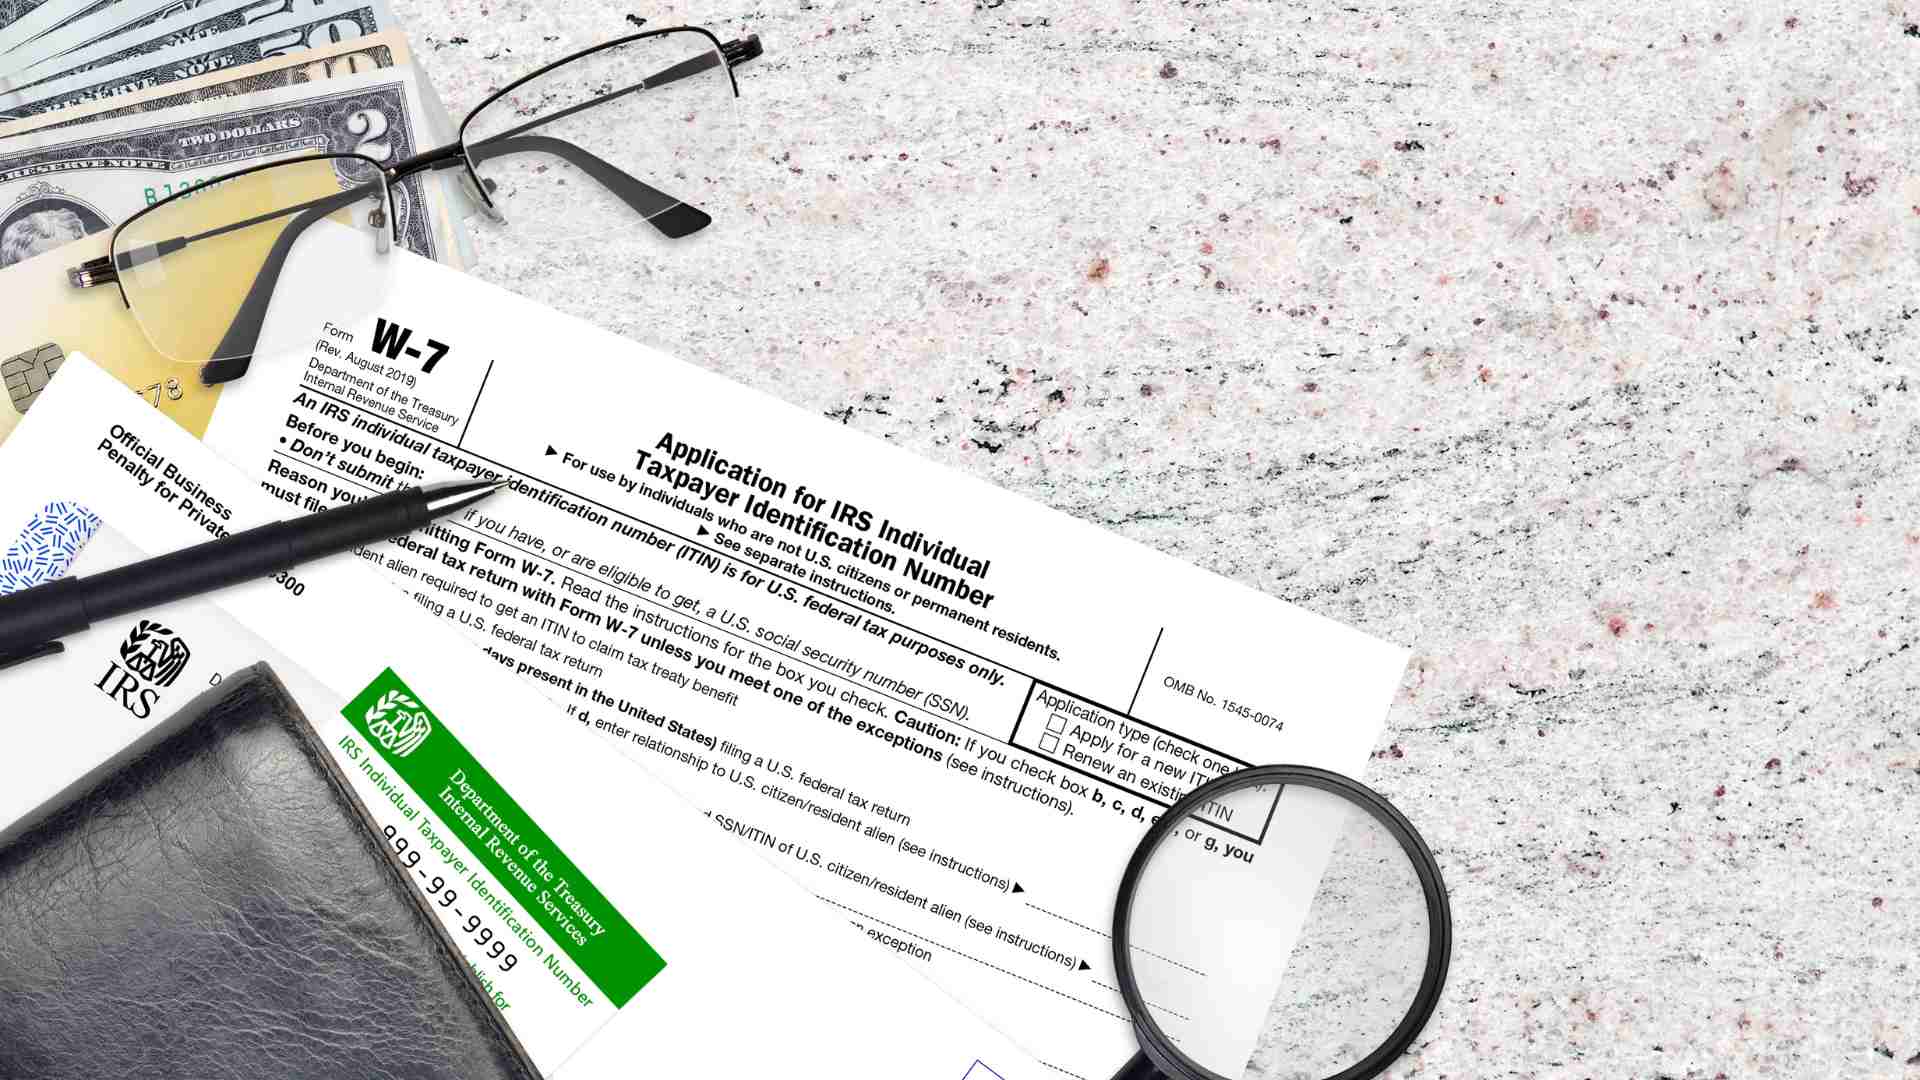 The IRS reminds taxpayers to have everything ready before the filing season starts